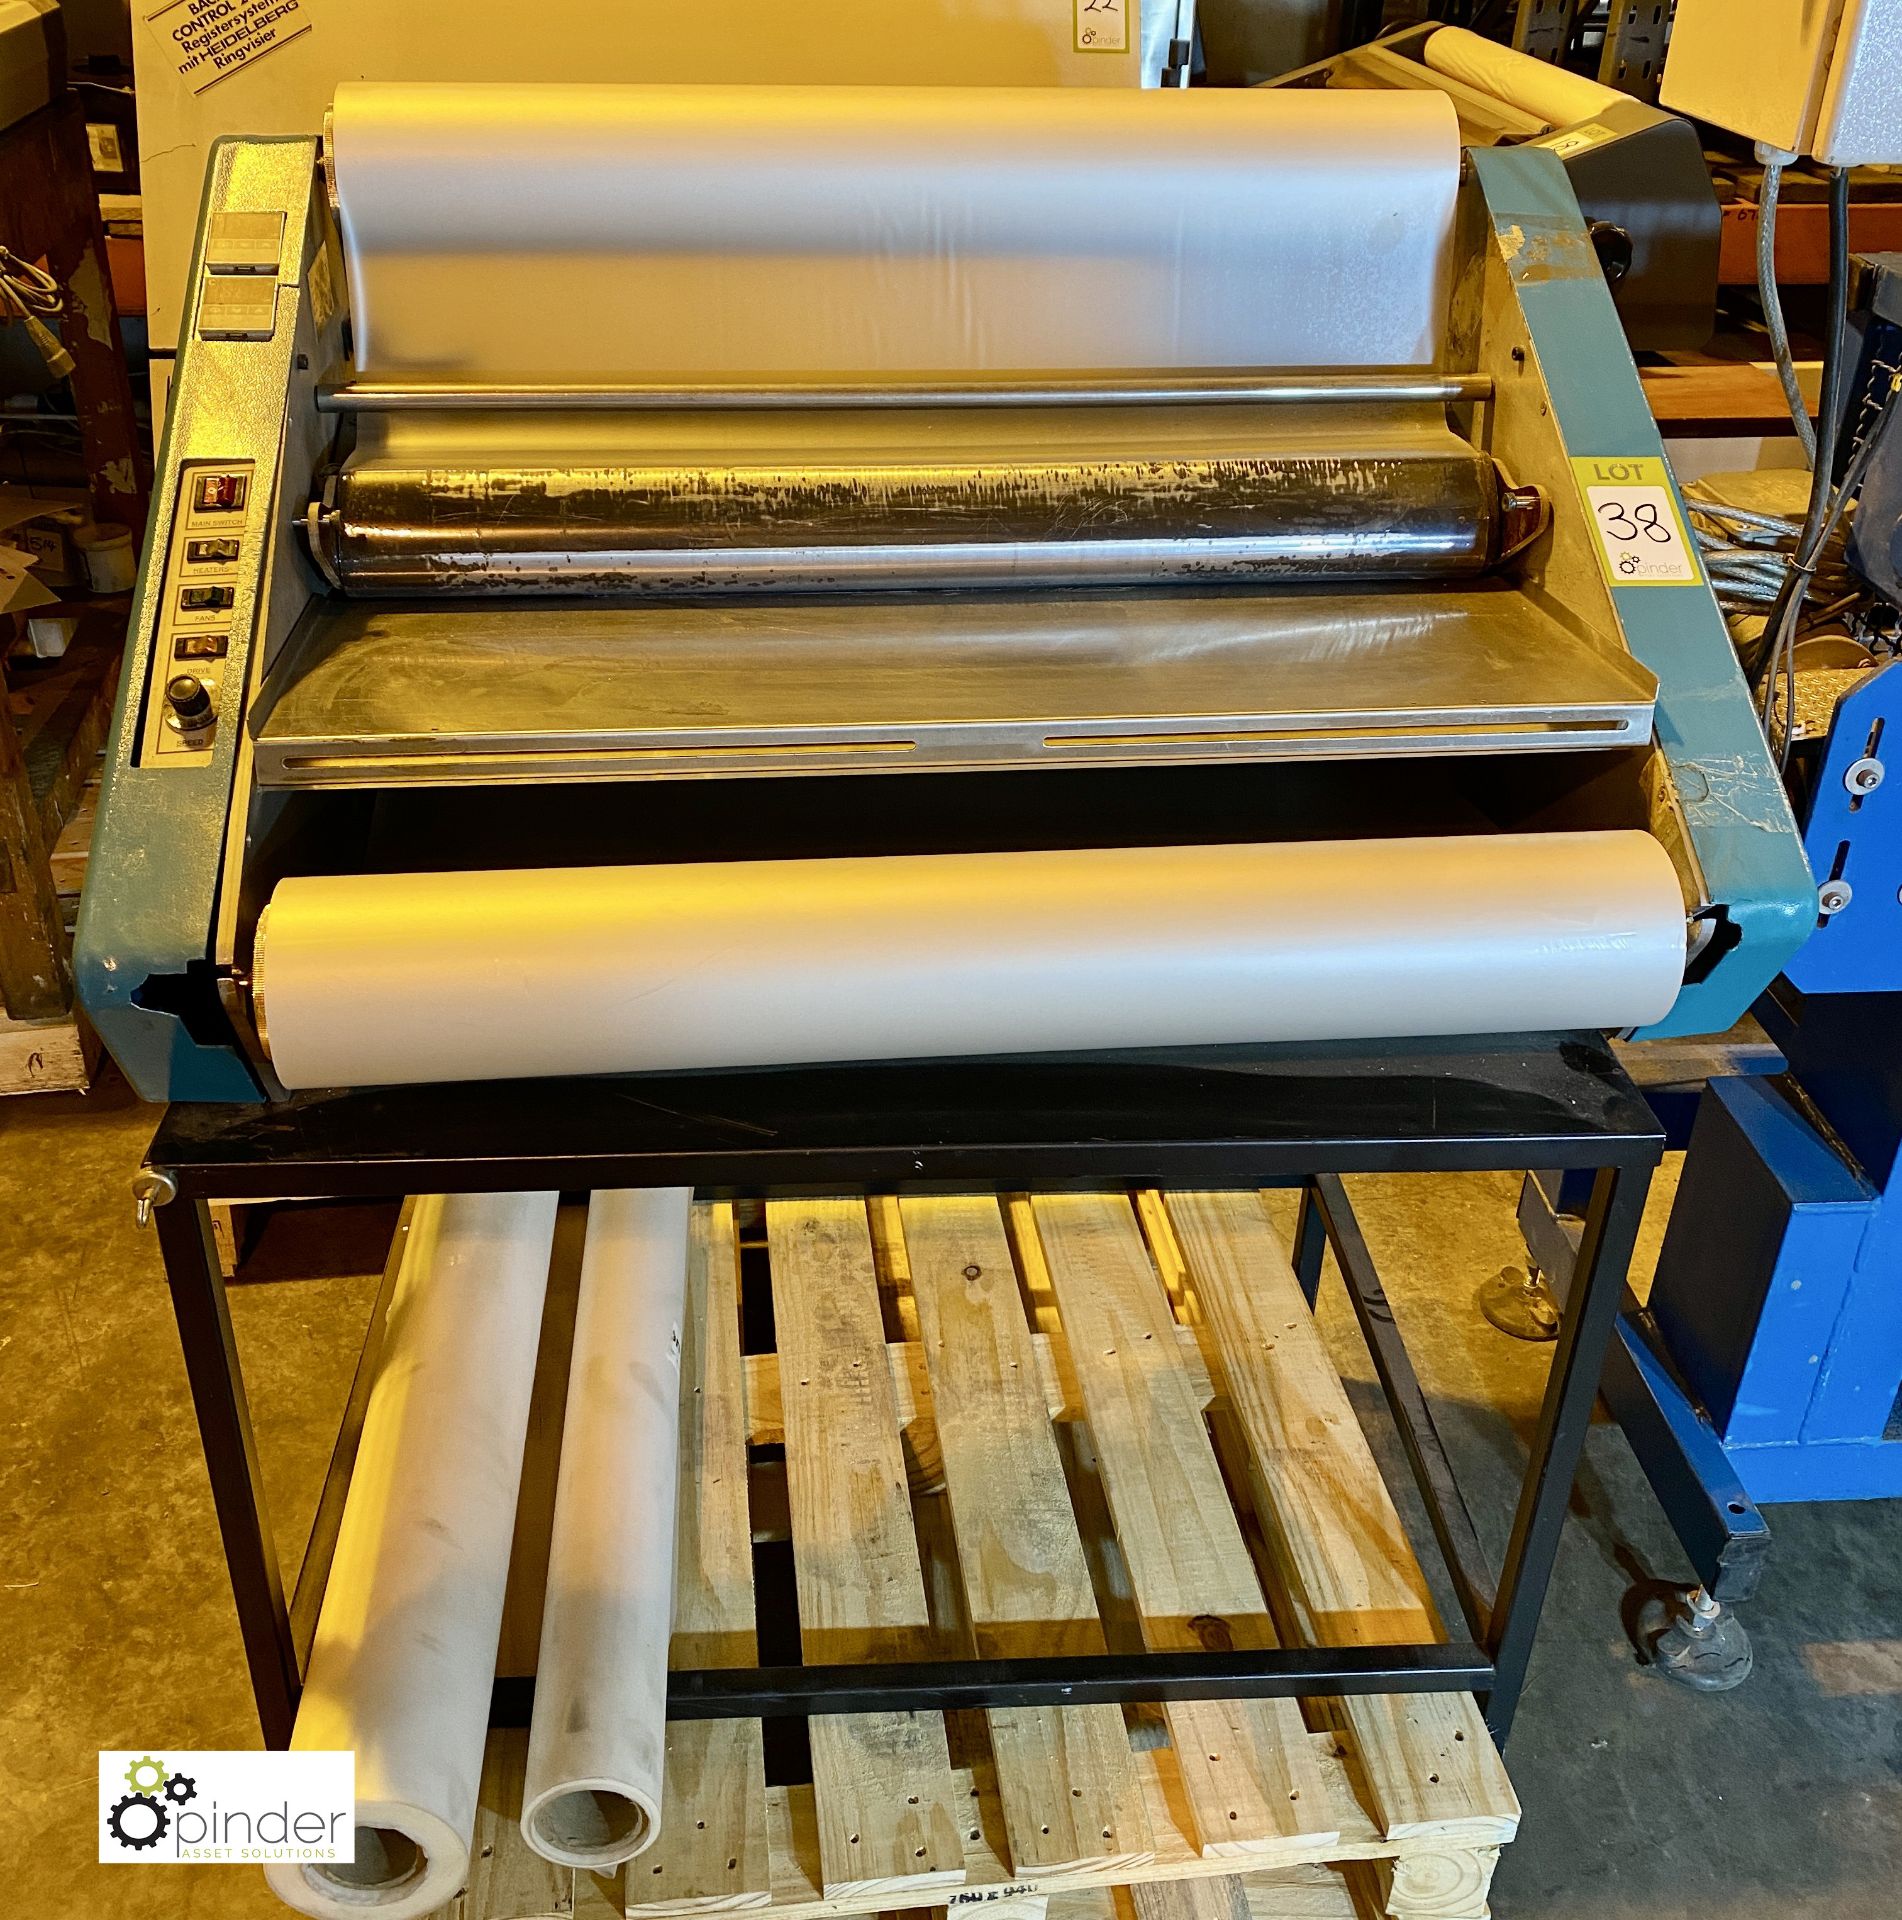 Morane RFTL 800 Roll Laminator, 800mm width, 240volts (please note there is a lift out fee of £5